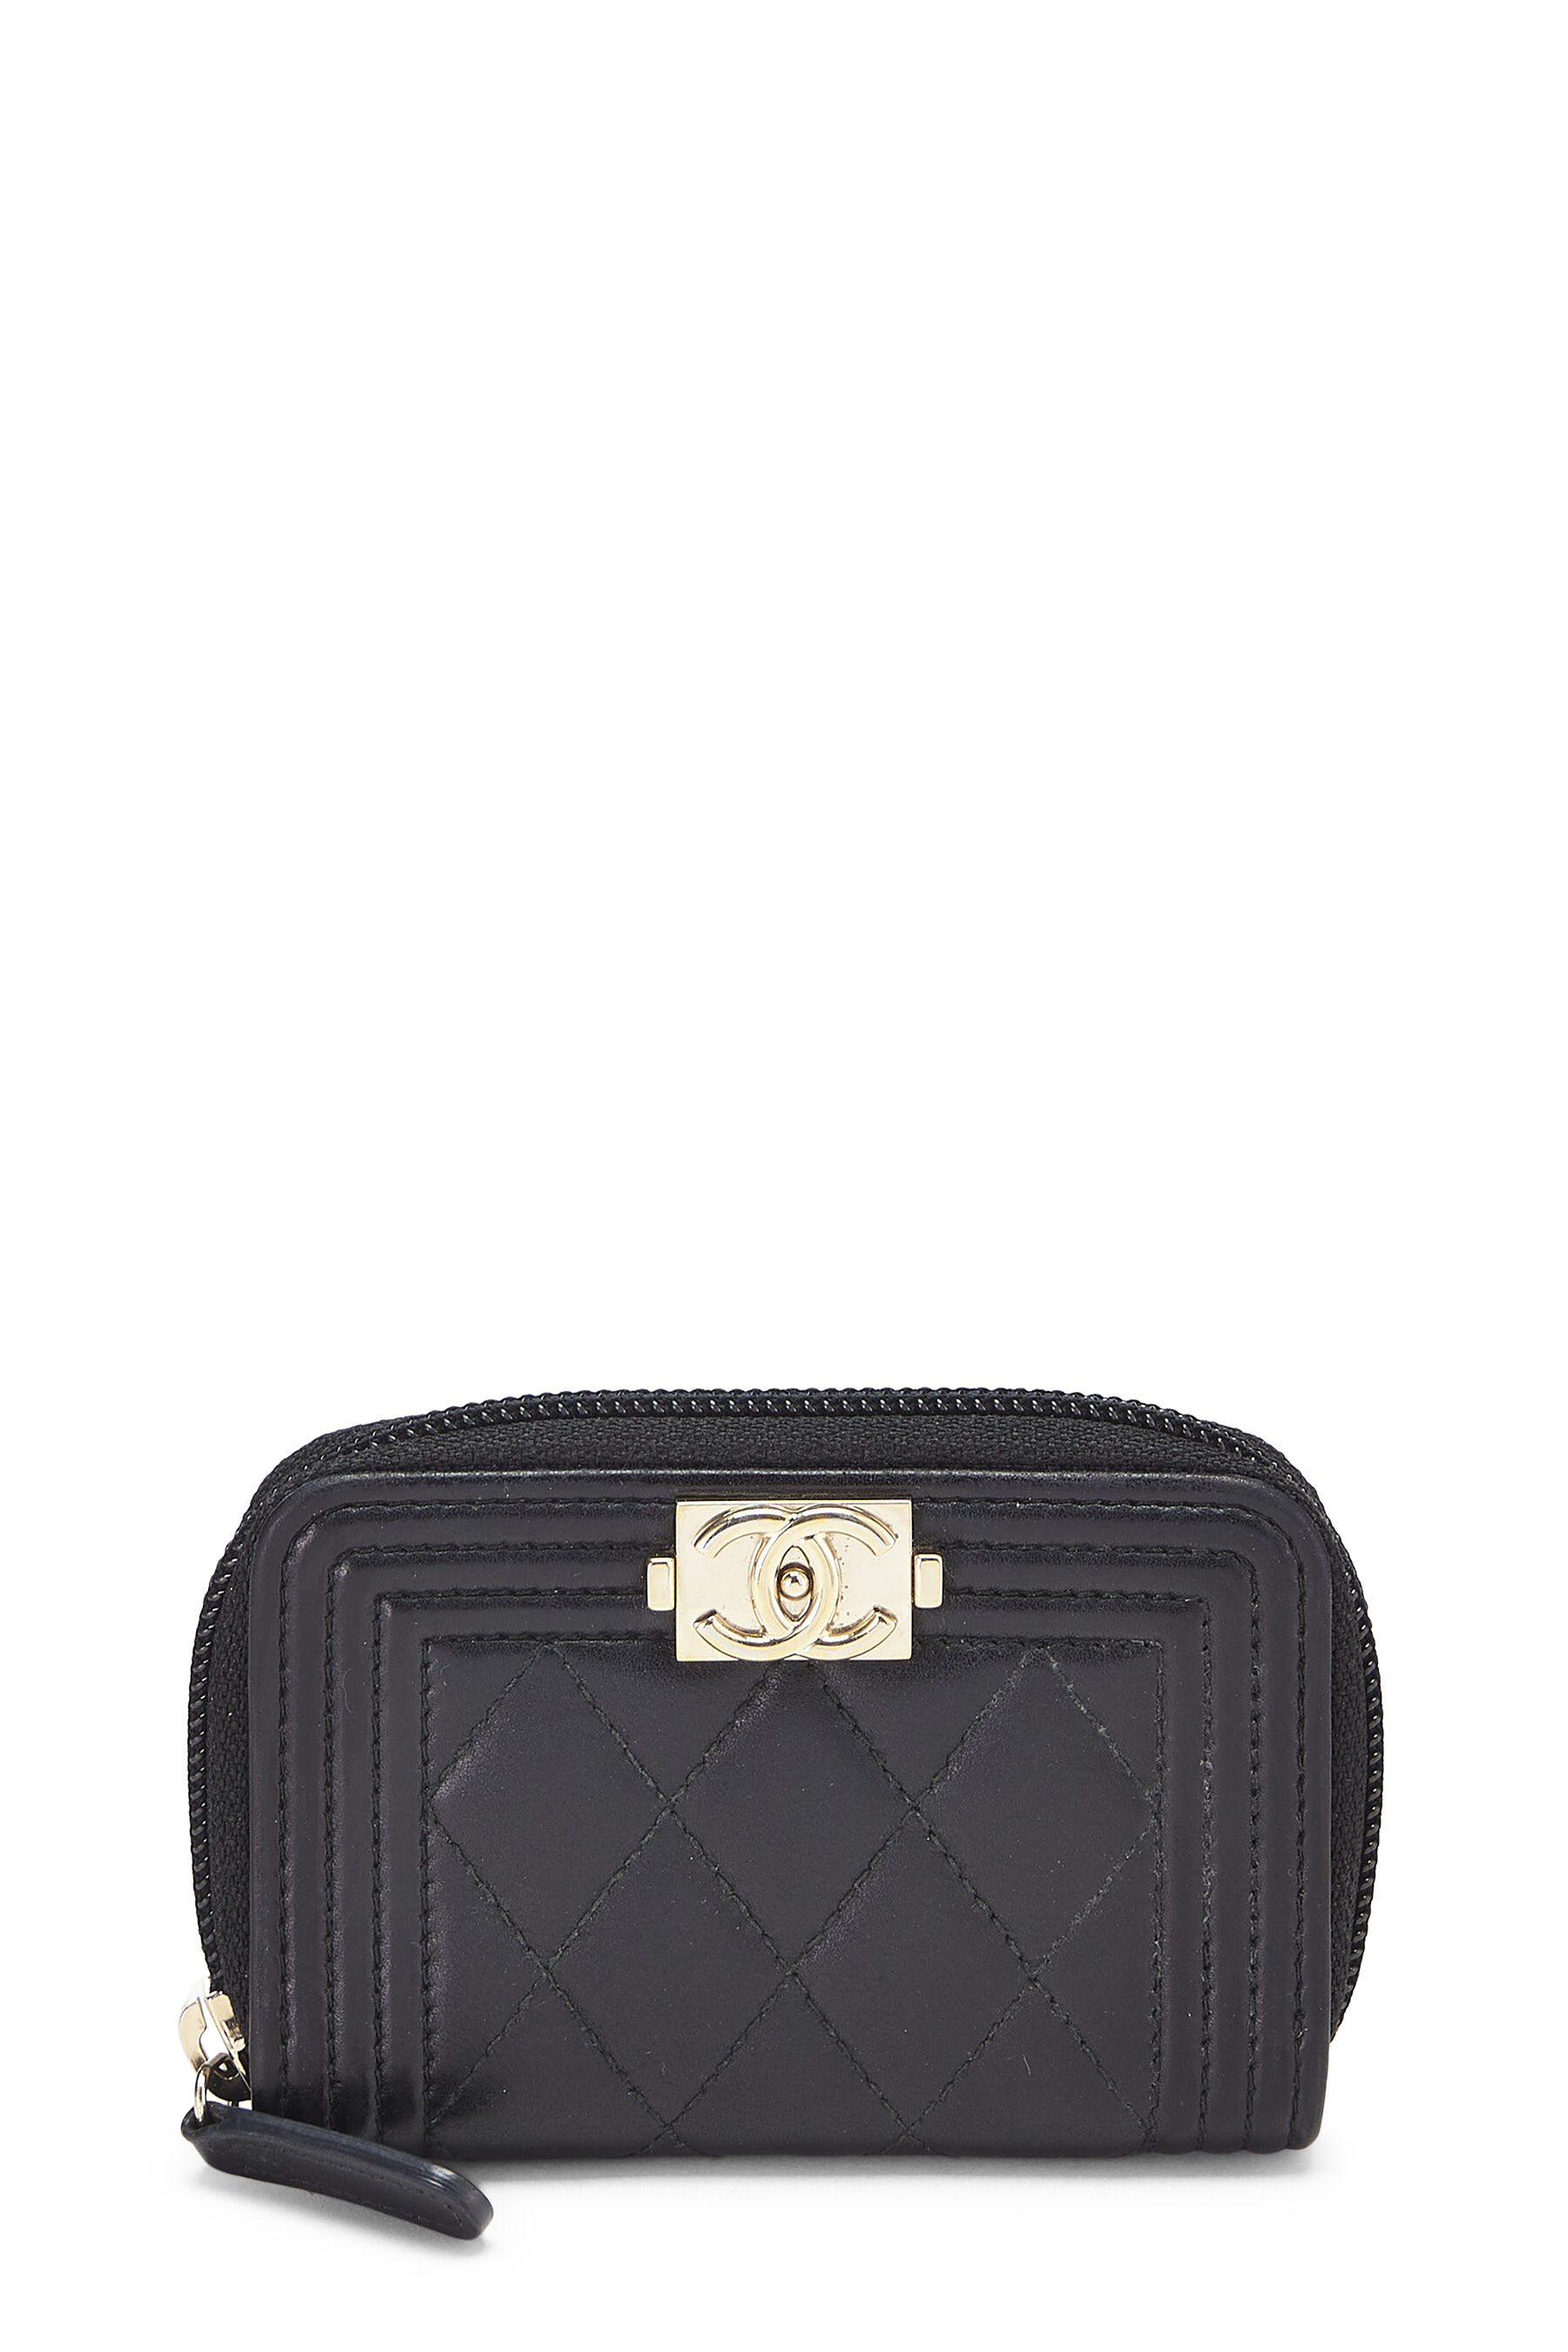 Chanel - Black Quilted Lambskin Boy Coin Purse